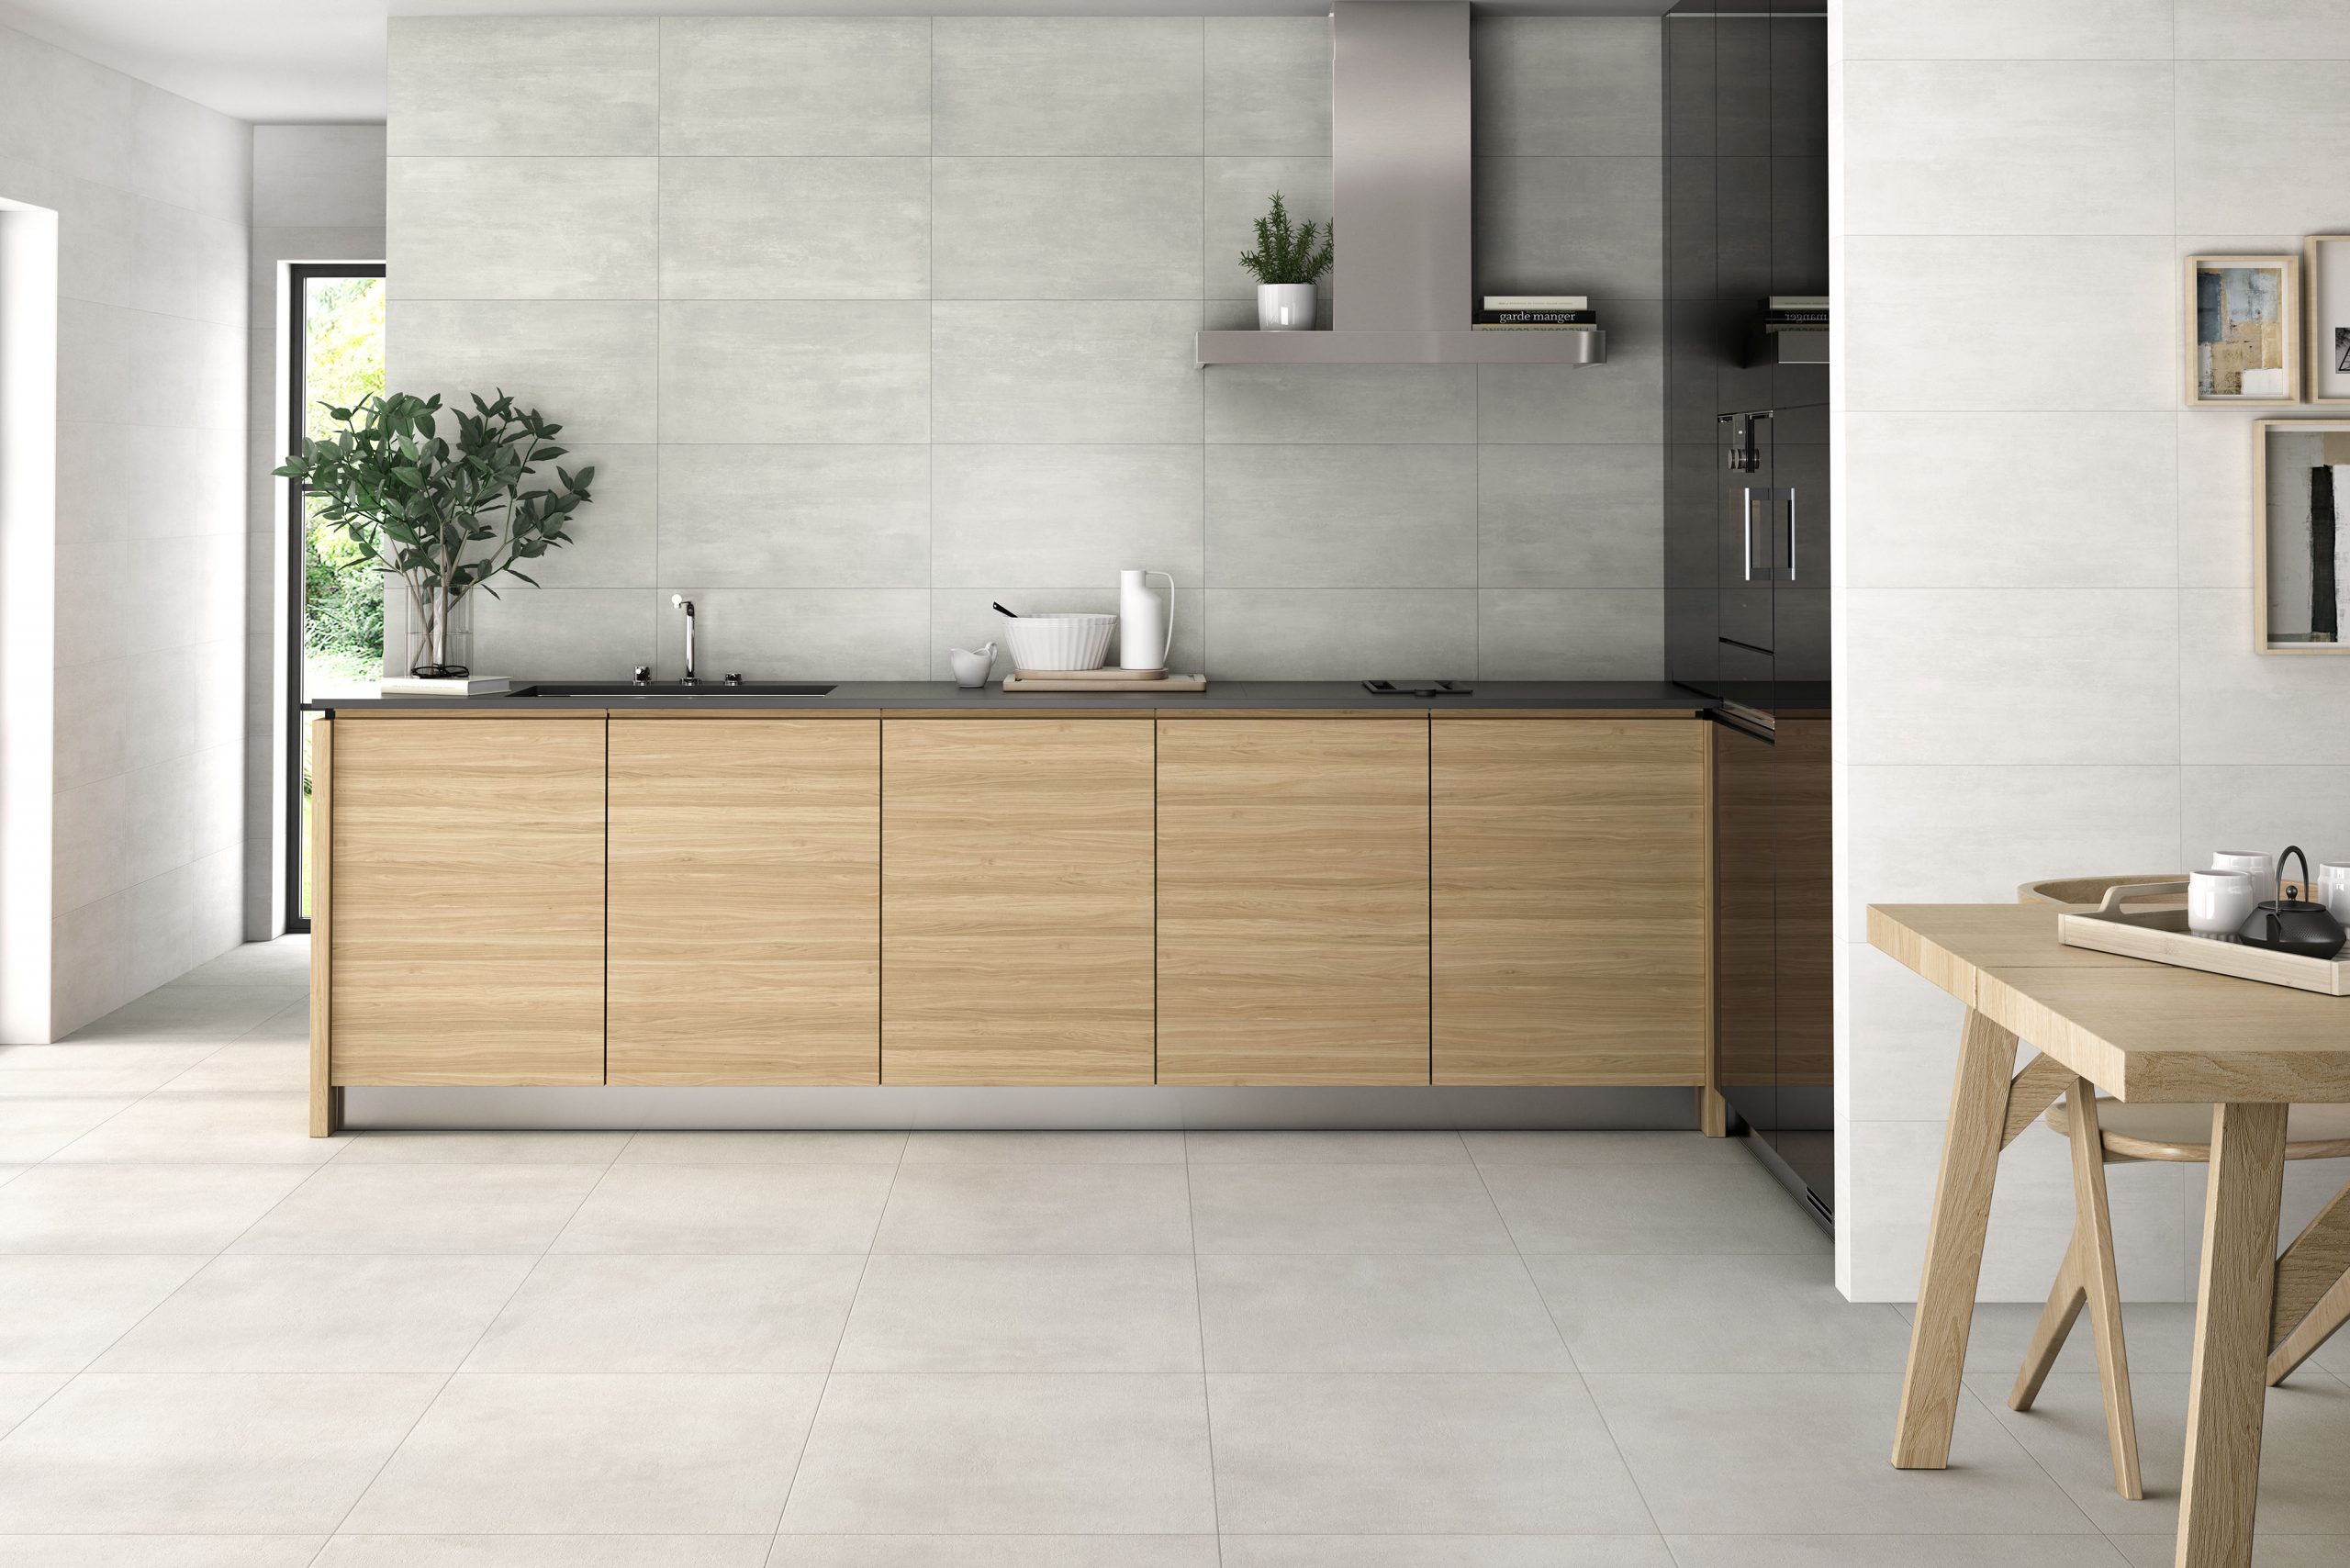 Tile and floor trends for kitchens with HDC Porcelain Tiles